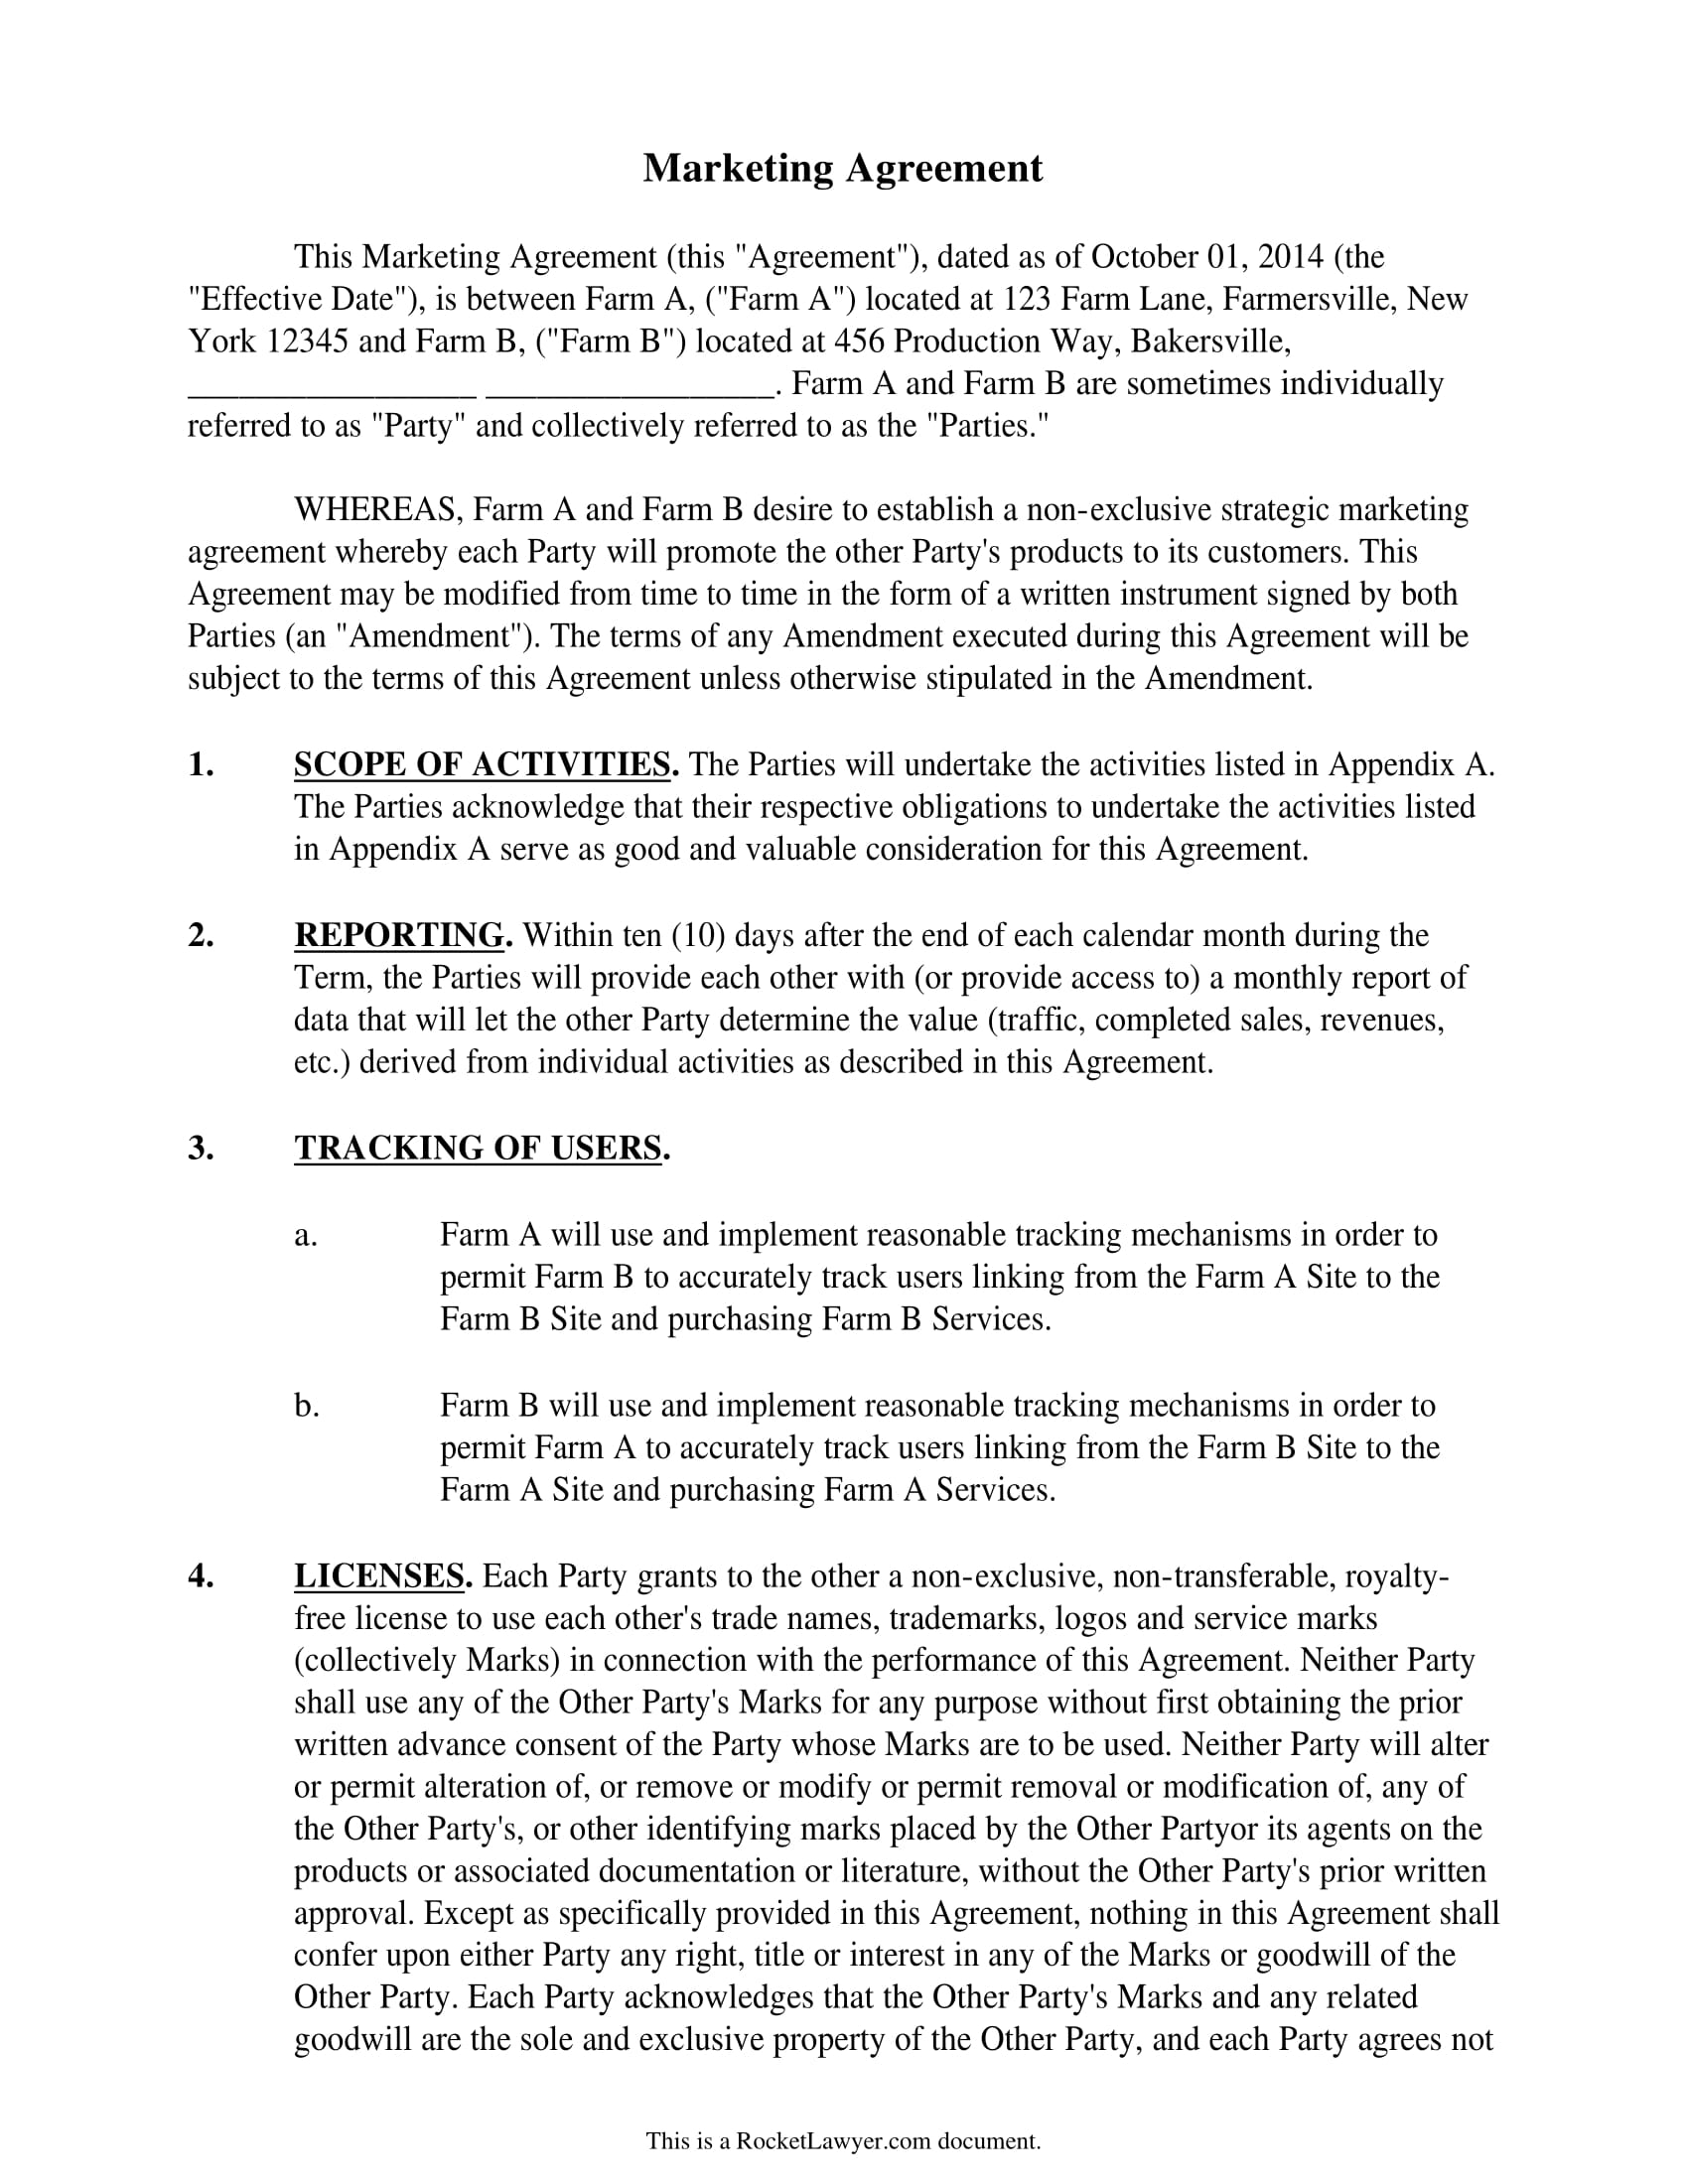 Marketing Agreement Examples 29+ Templates in PDF, Word, Pages Examples